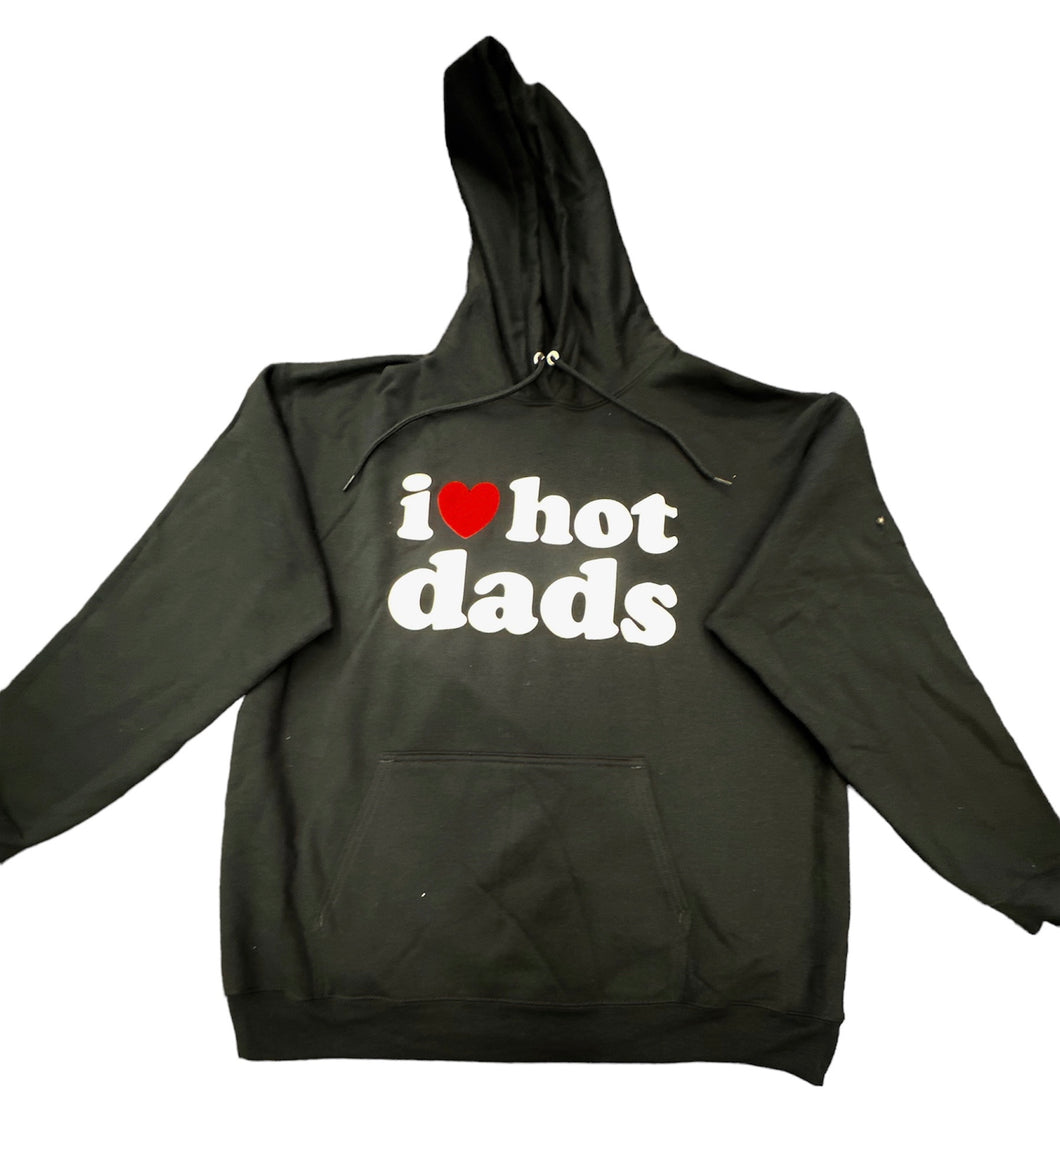 Hot dads sweater